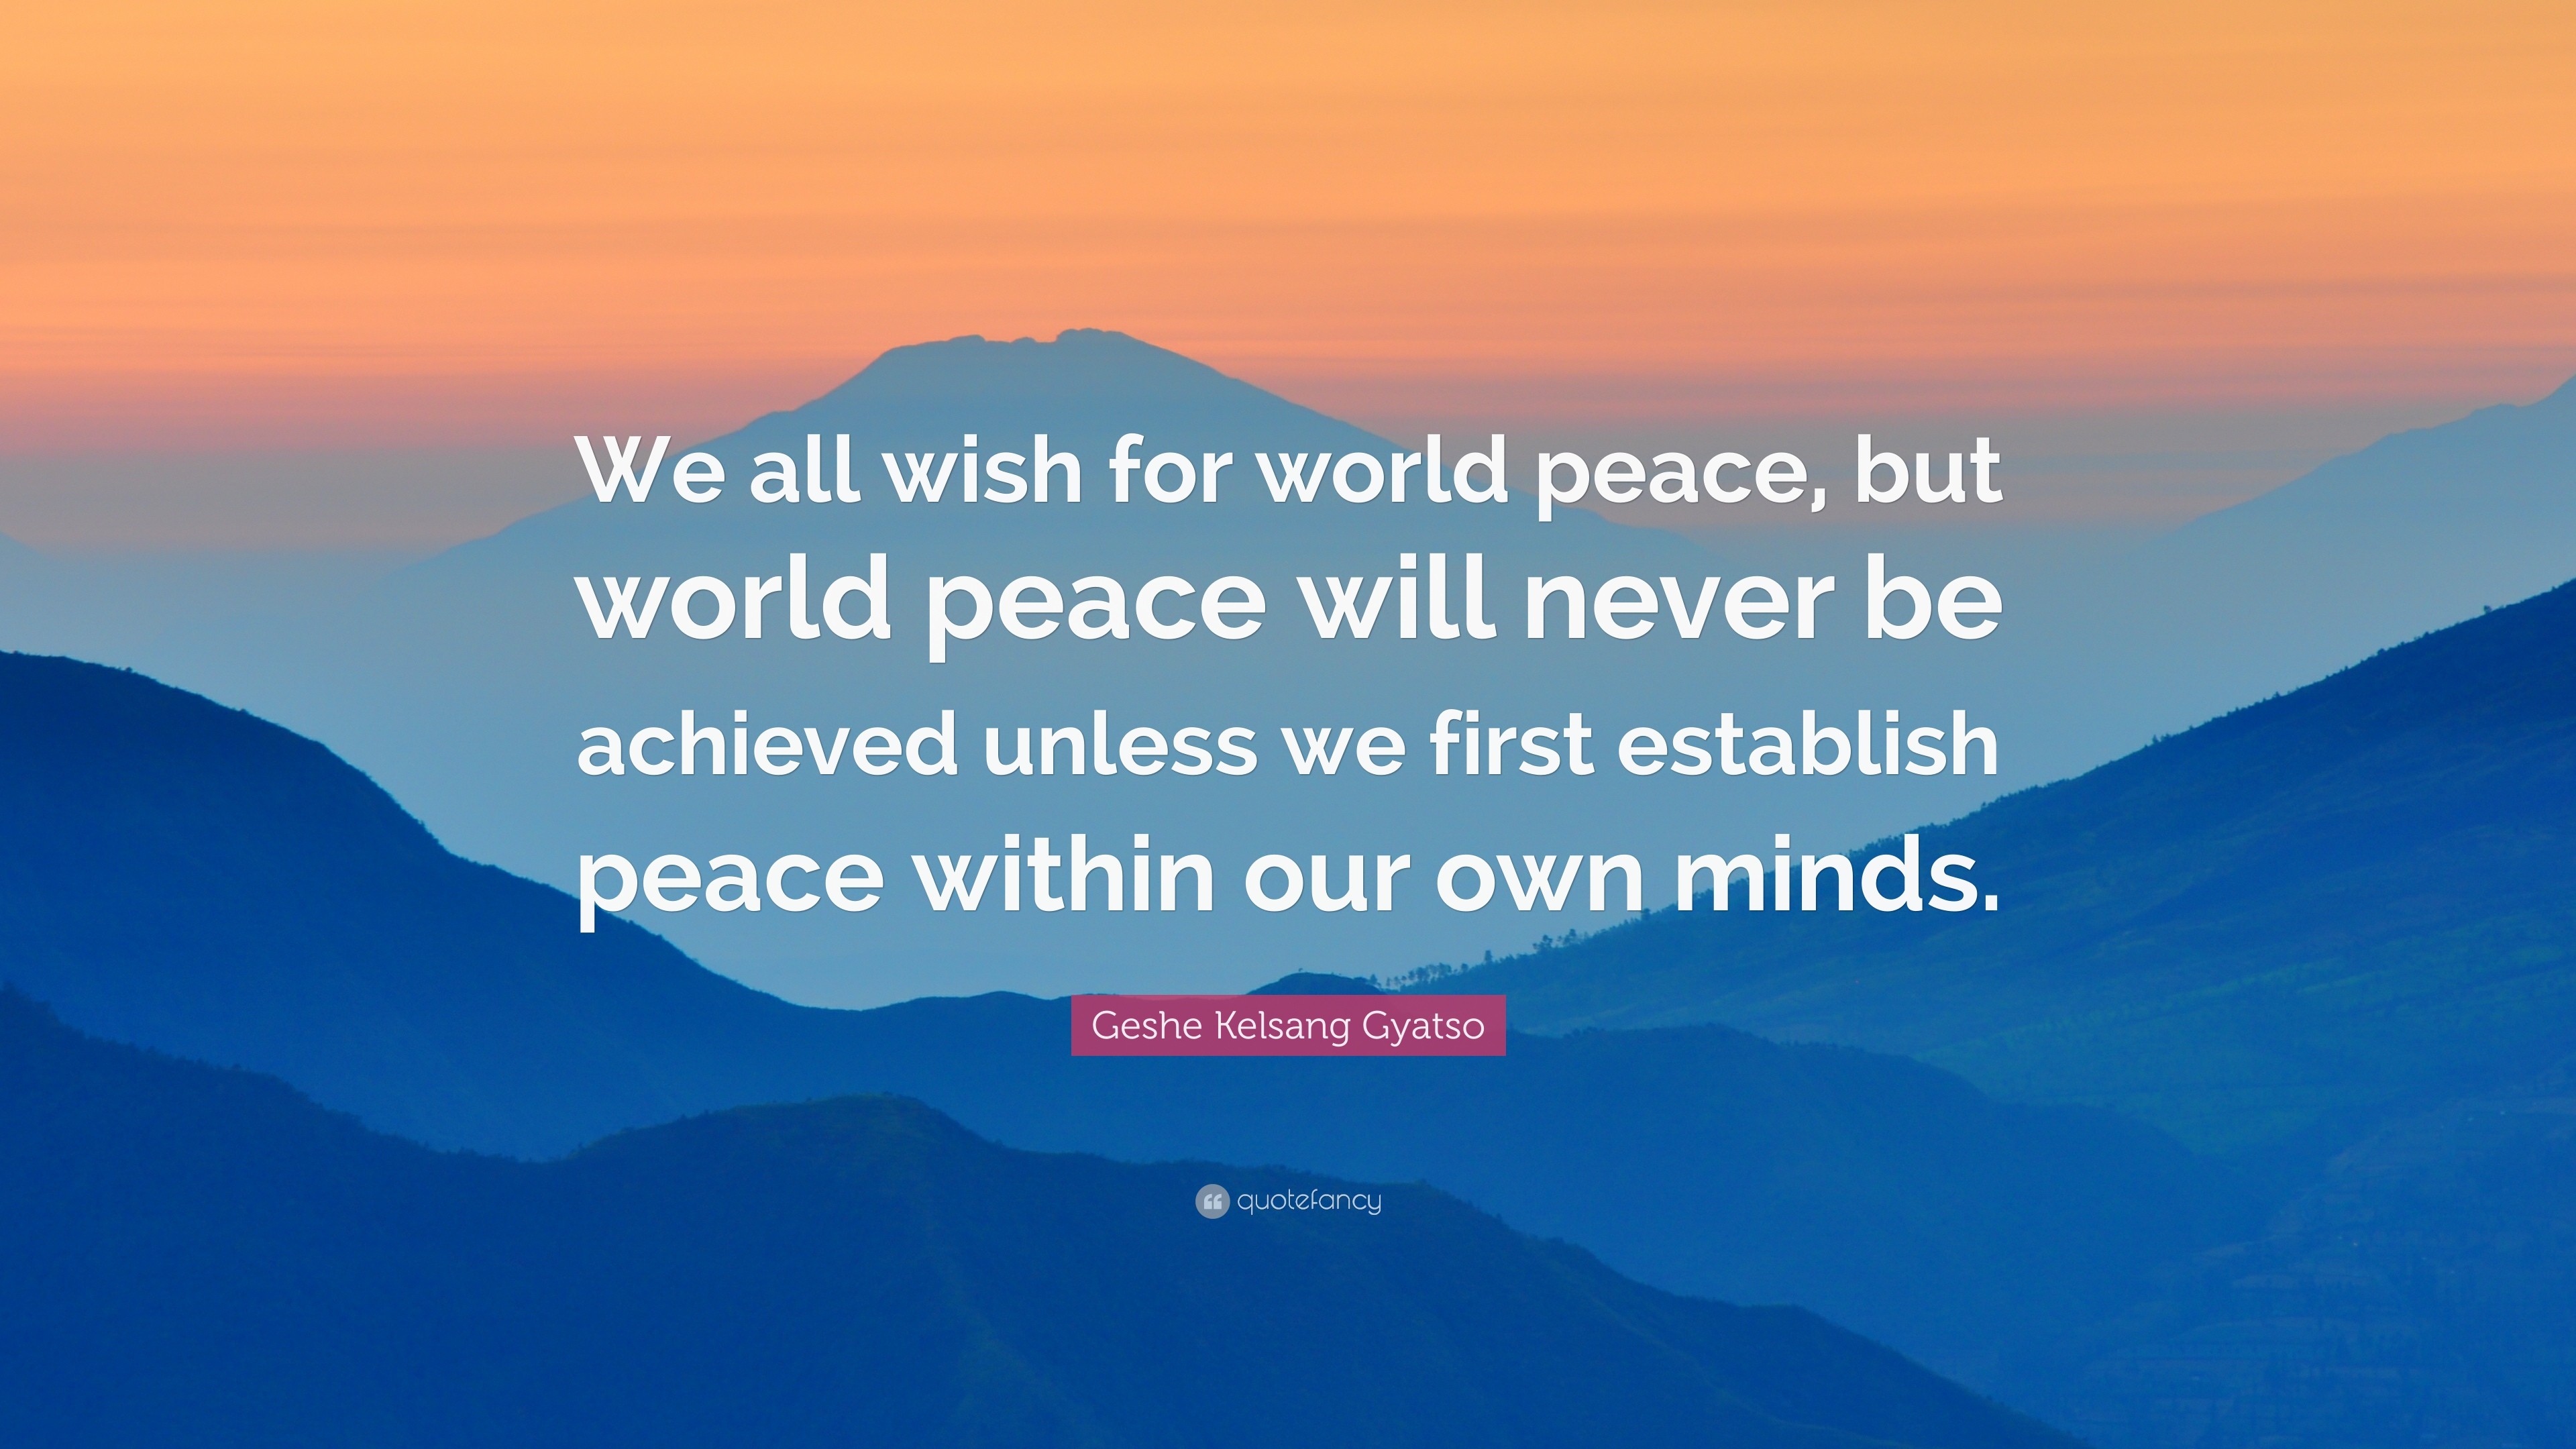 3840x2160 Geshe Kelsang Gyatso Quote: “We all wish for world peace, but world peace